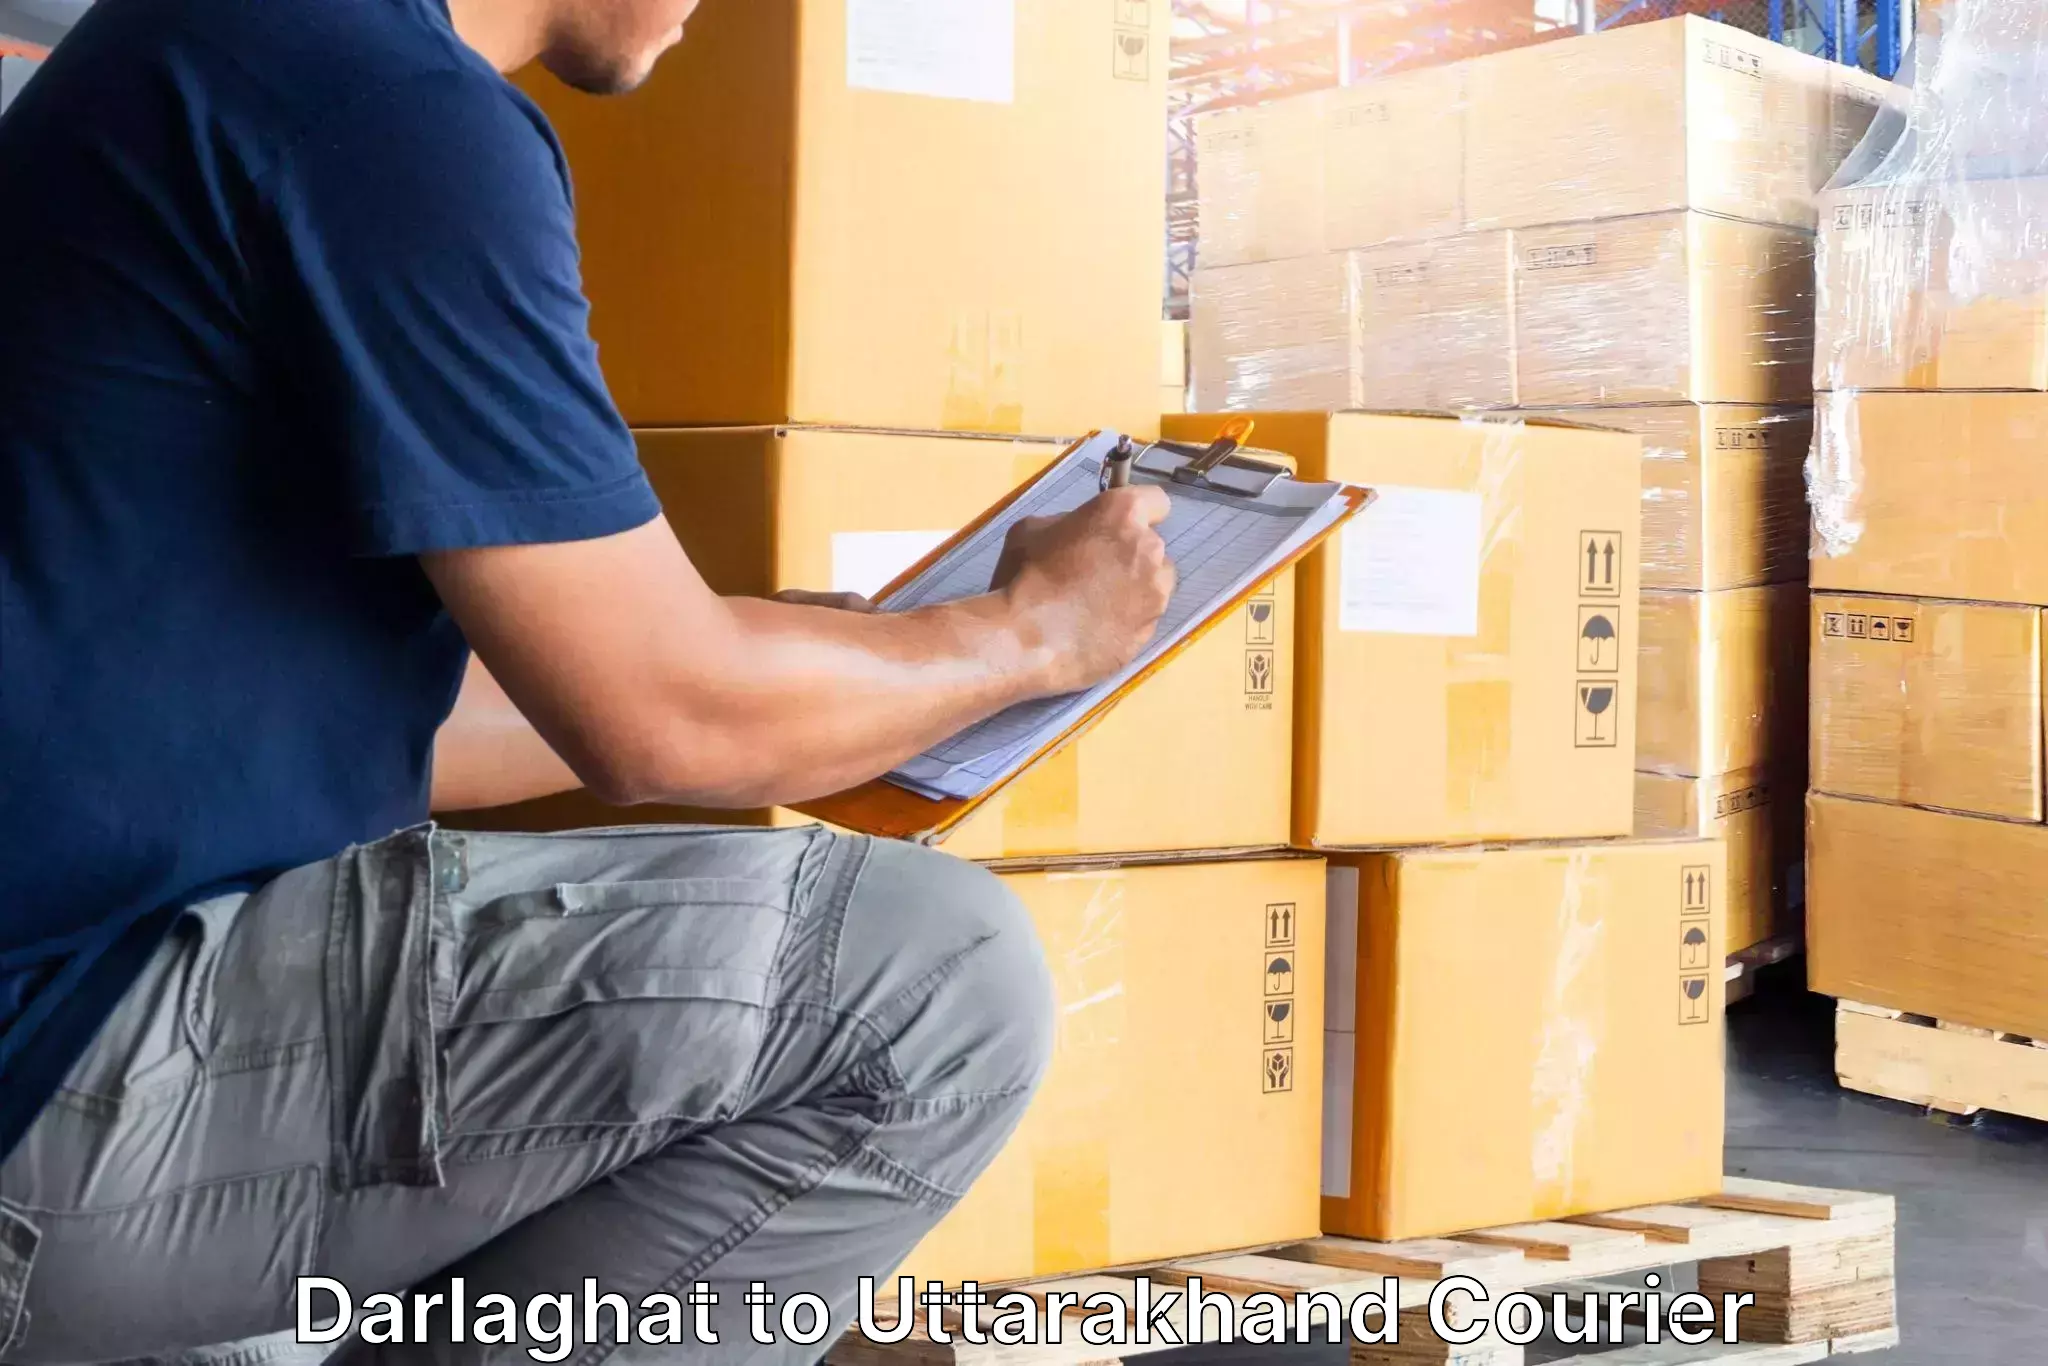 Furniture moving specialists Darlaghat to Uttarakhand